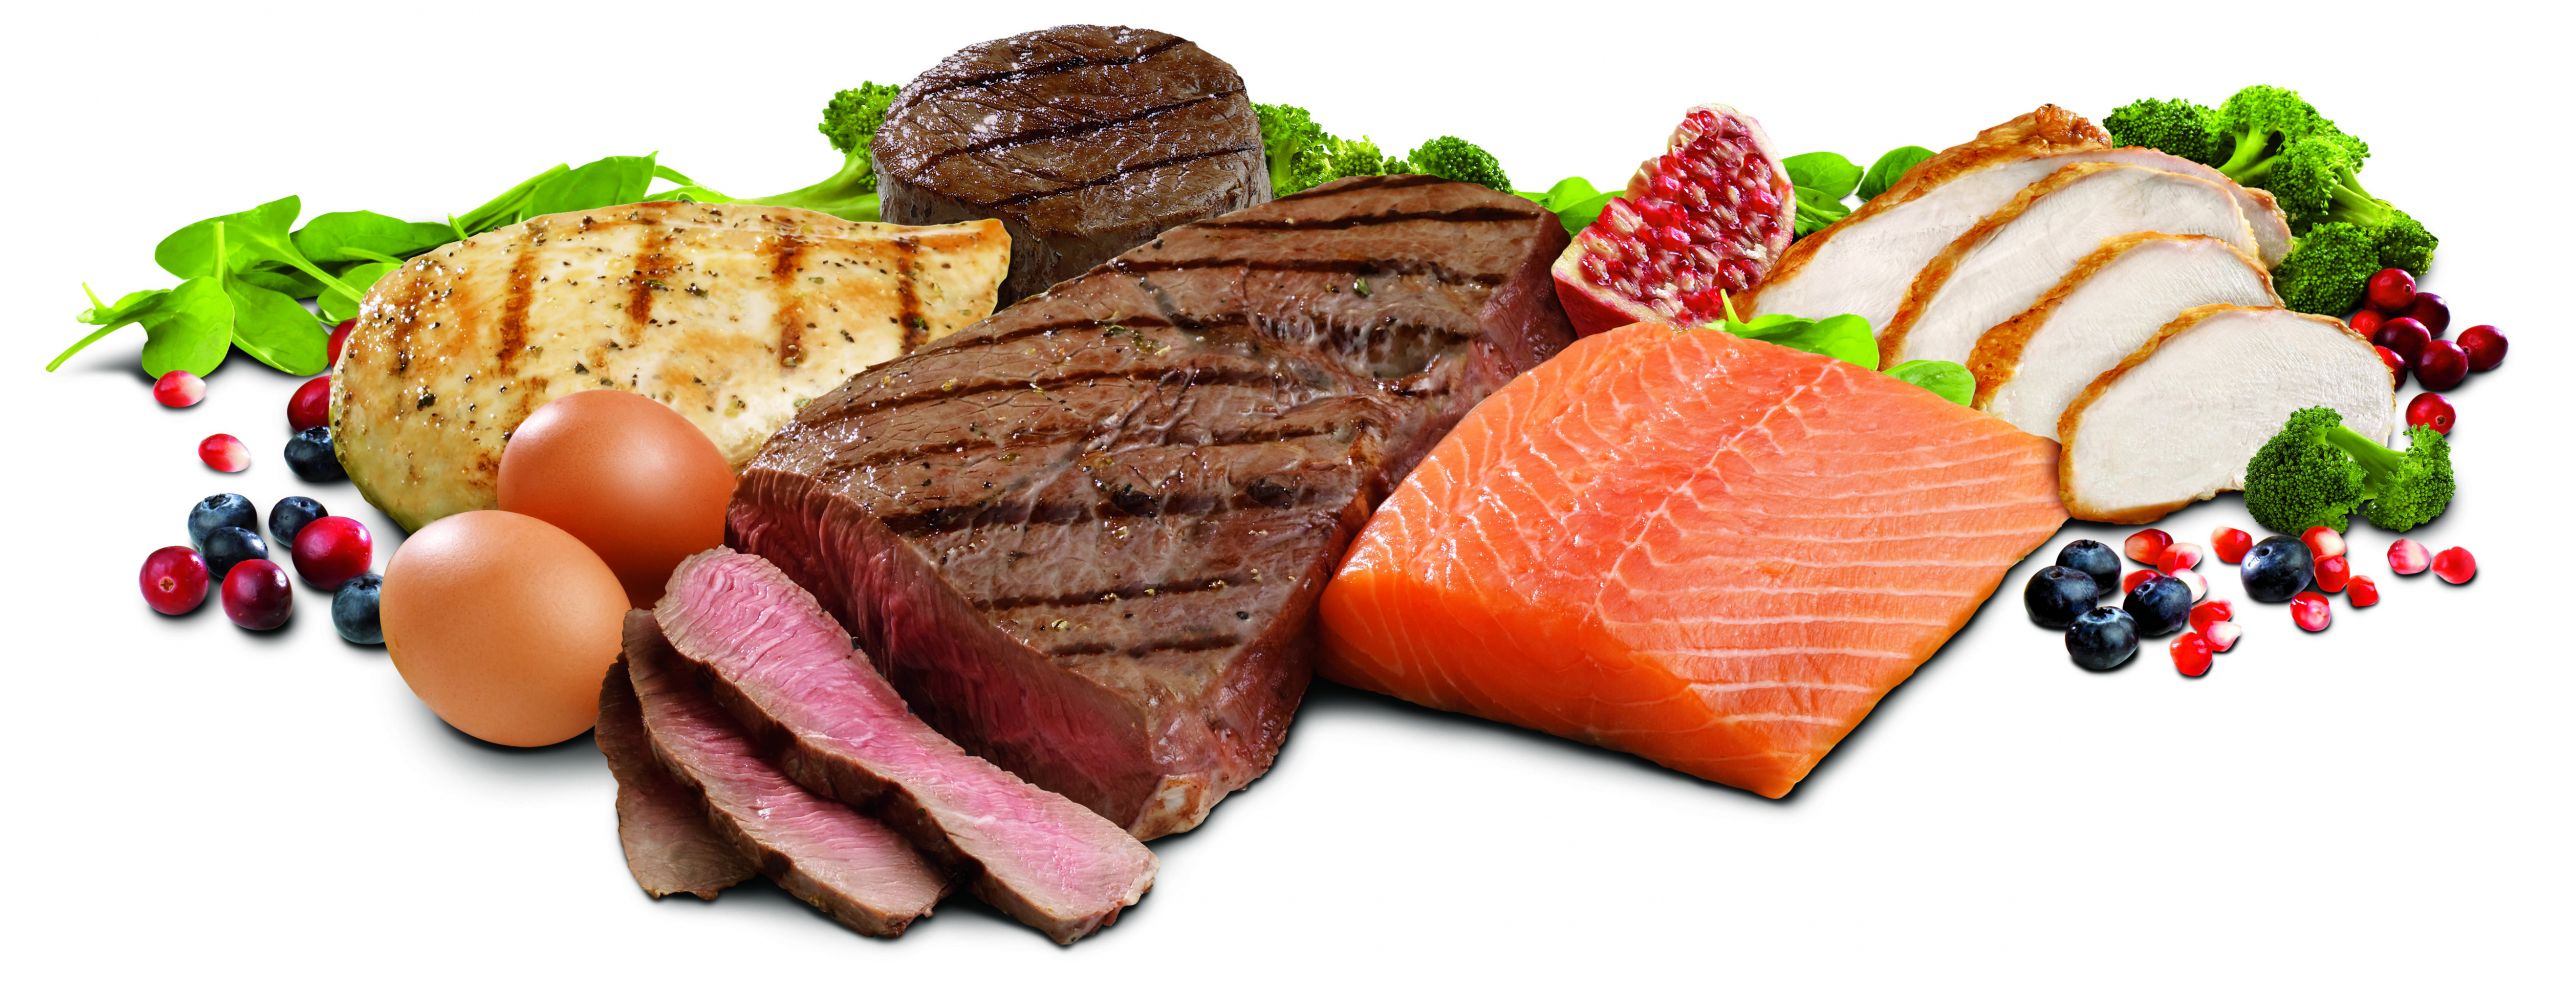 High Protein Low Carbohydrate Diet
 What Are The Effects of A Low Carb High Protein Diet An